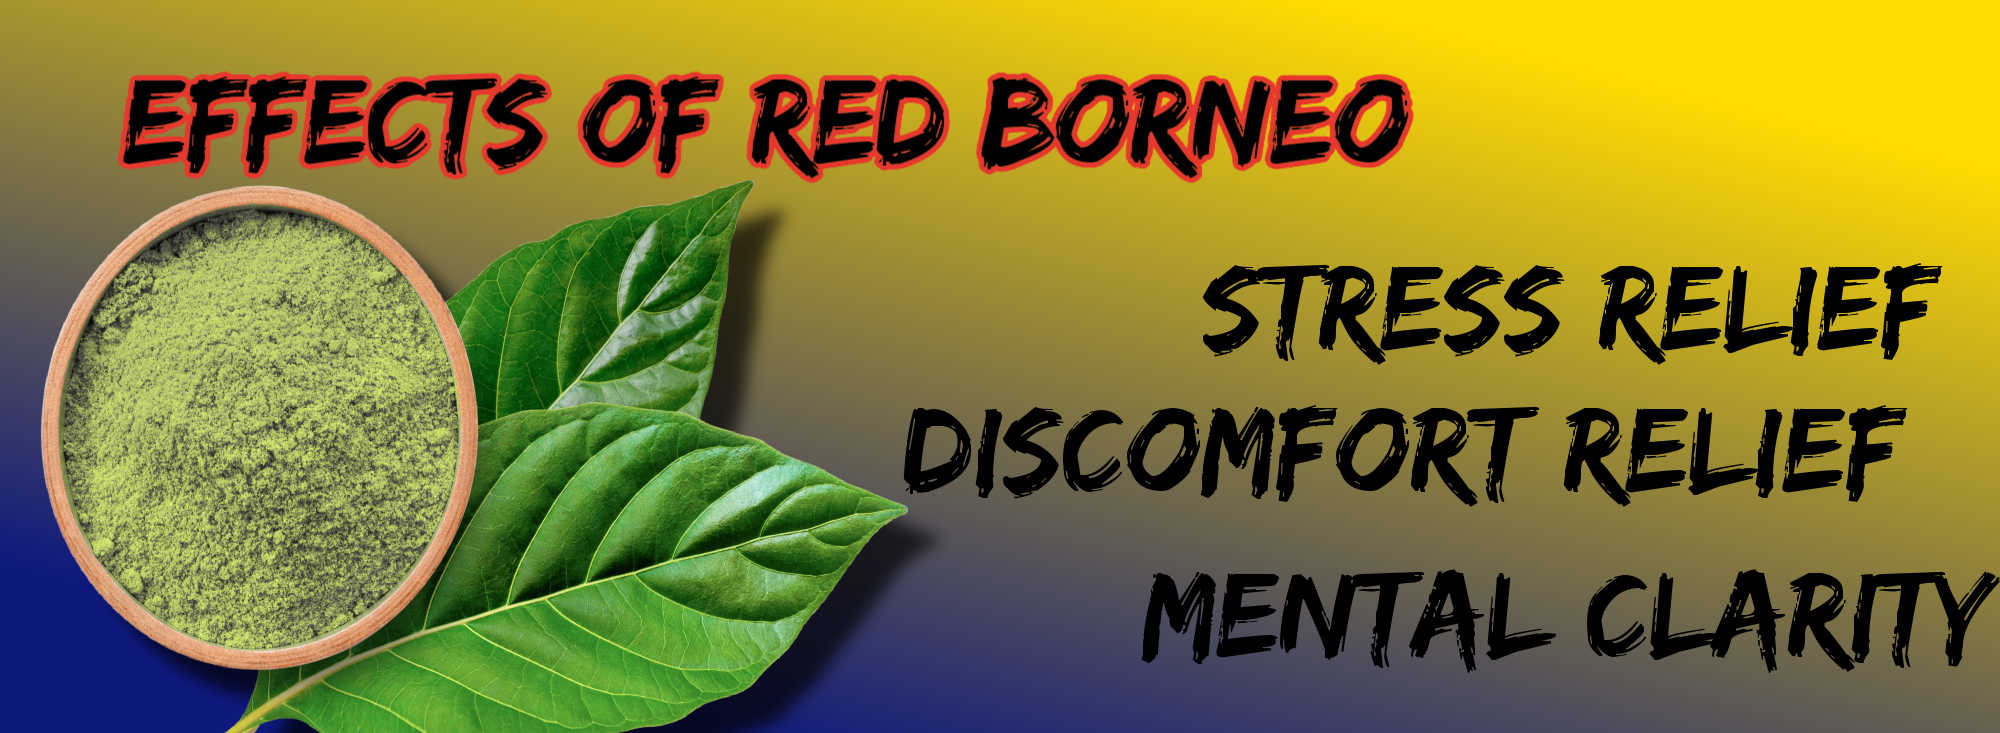 image of red borneo kratom effects